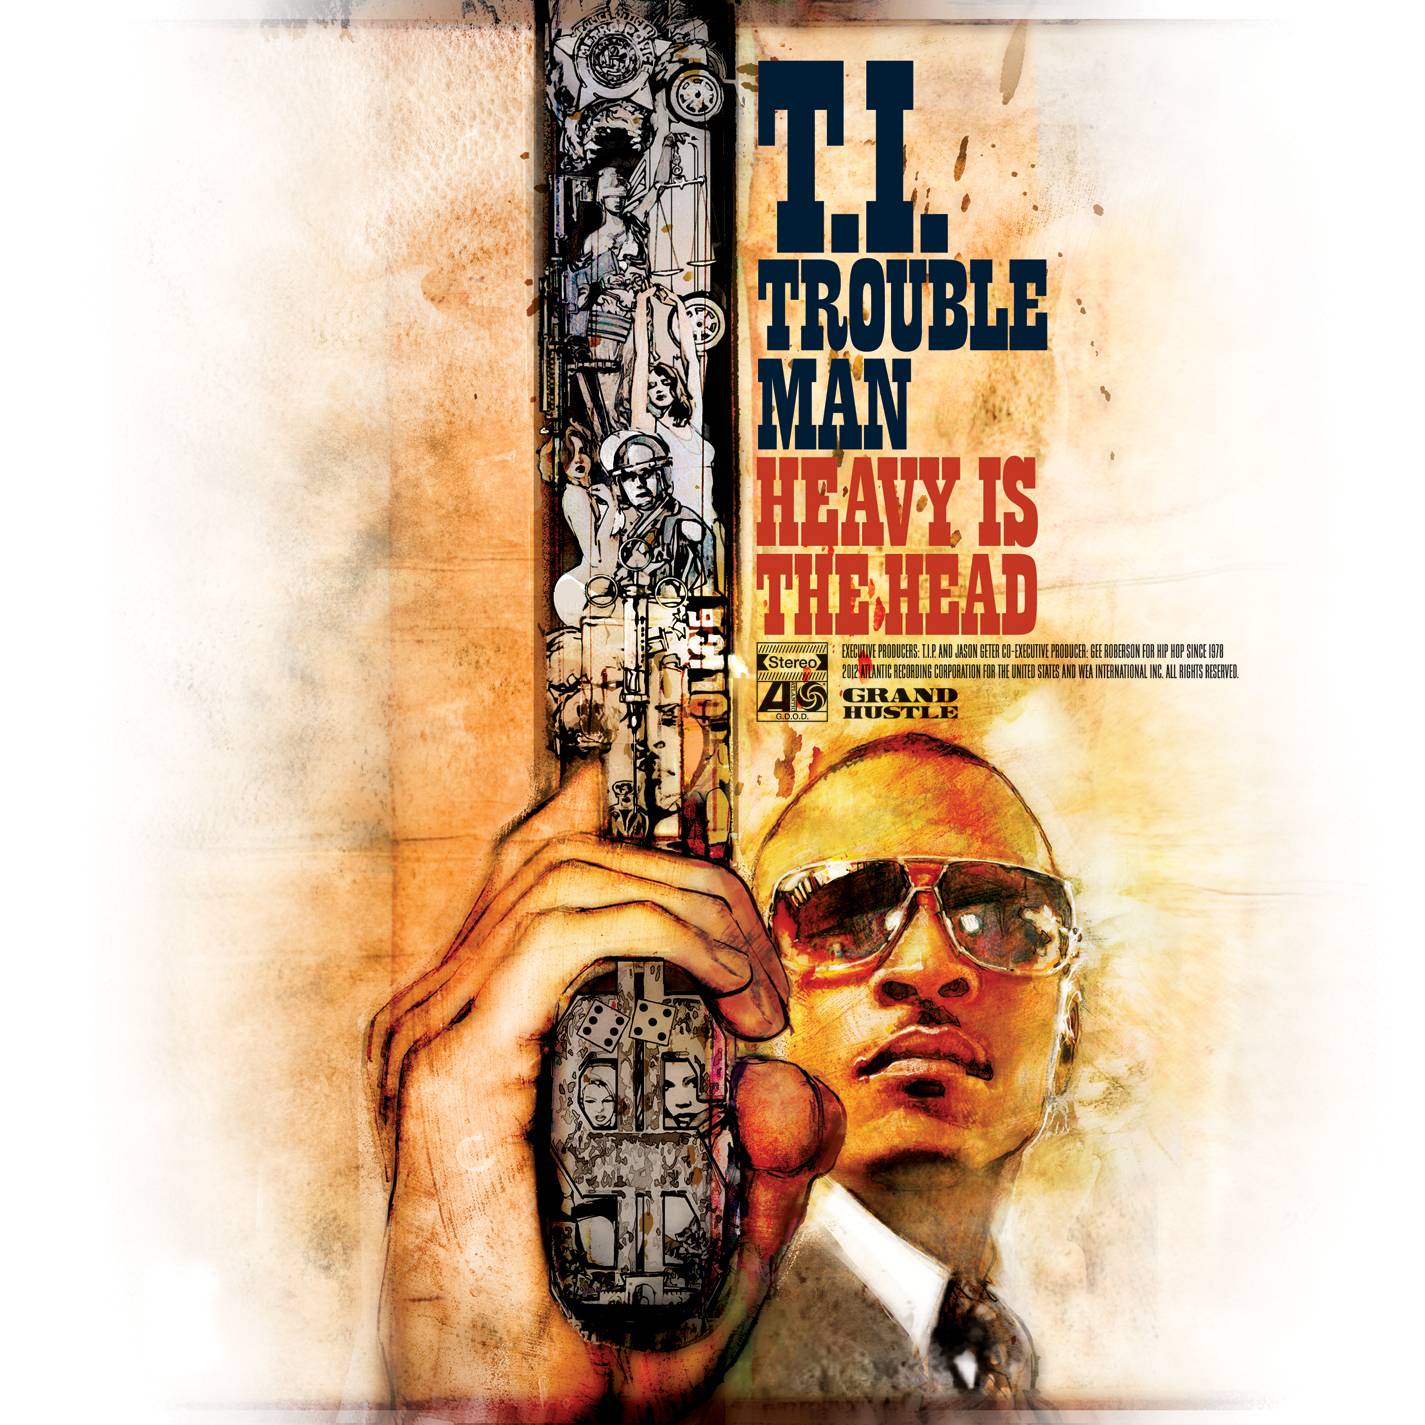 News Added Nov 22, 2012 T.I. reveals the official artwork and tracklist for his upcoming album Trouble Man: Heavy Is The Head. The album will feature Andre 3000, Lil Wayne, A$AP Rocky, Meek Mill, R. Kelly, Akon, Cee-Lo Green and P!nk. The LP is set to hit stores on December 18th. Submitted By Hiphop4life Track […]